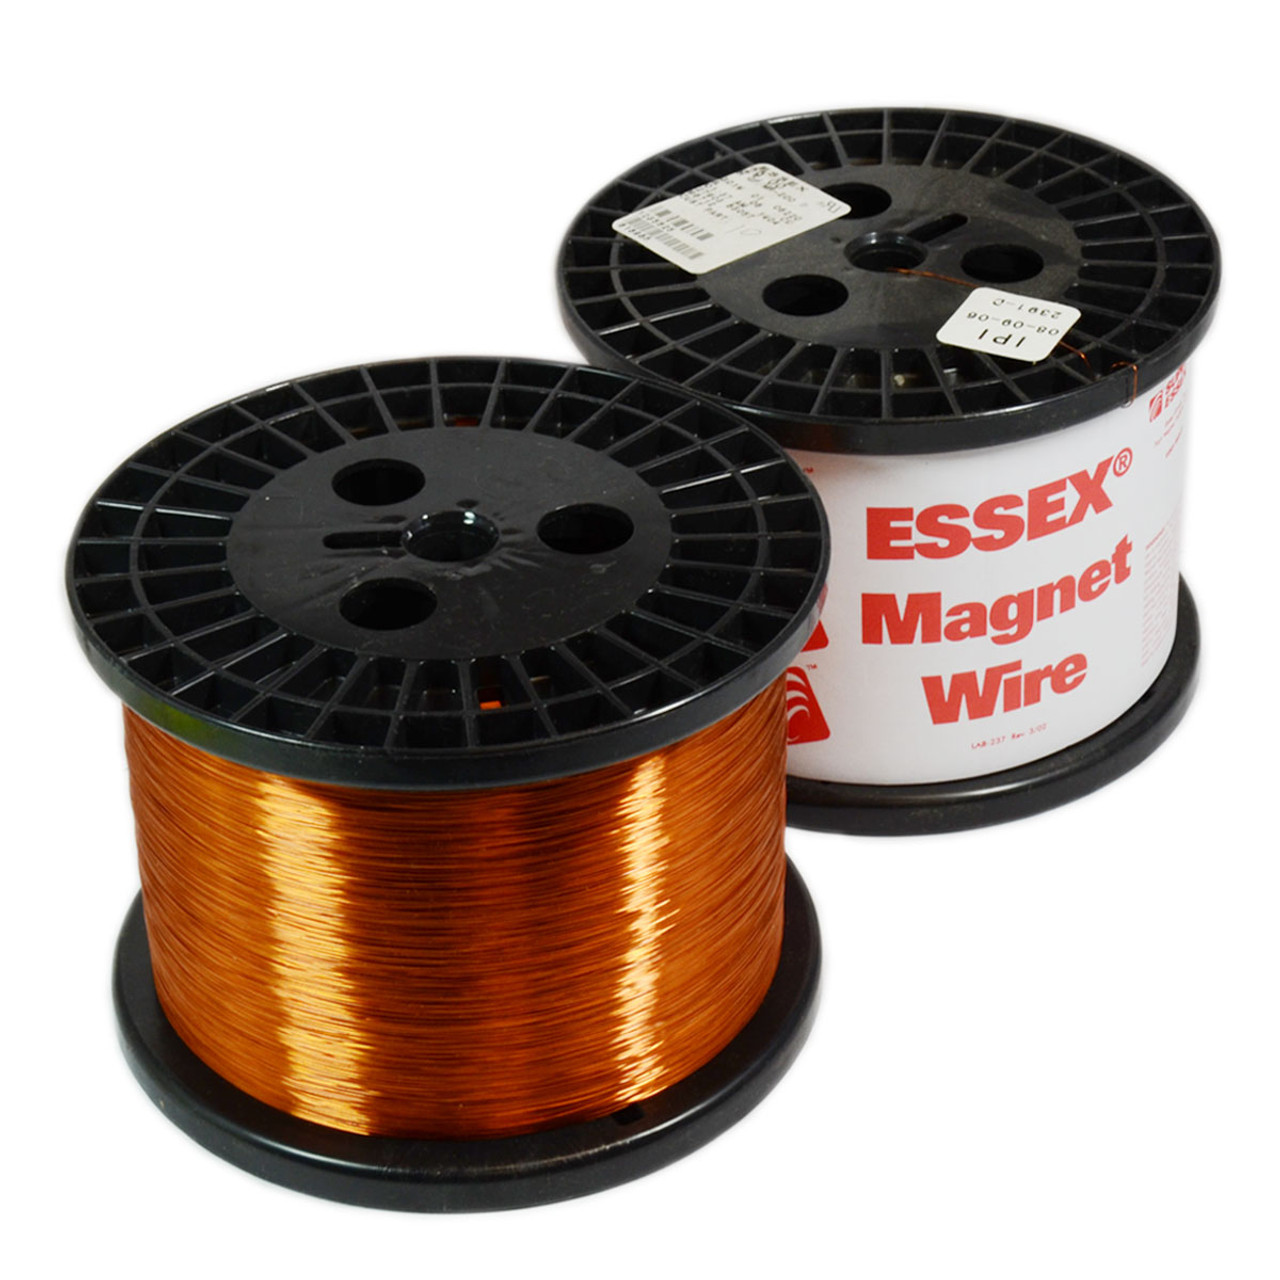 Essex SODERON 155 Magnet Wire 28 AWG